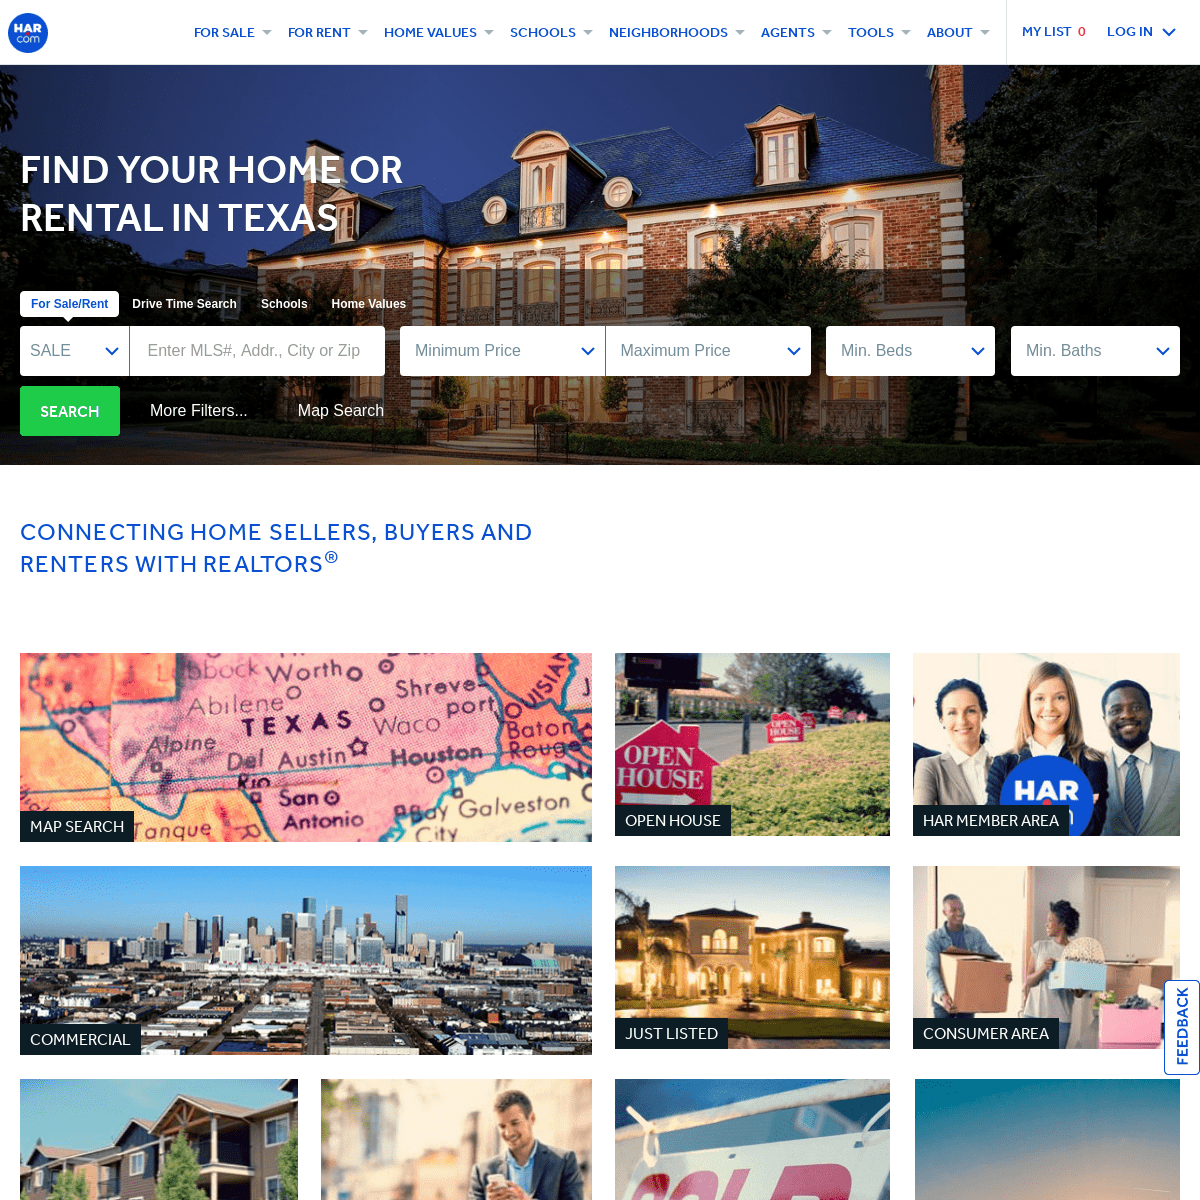 Texas Real Estate - 225,170 Homes for Sale and Rent- HAR.com